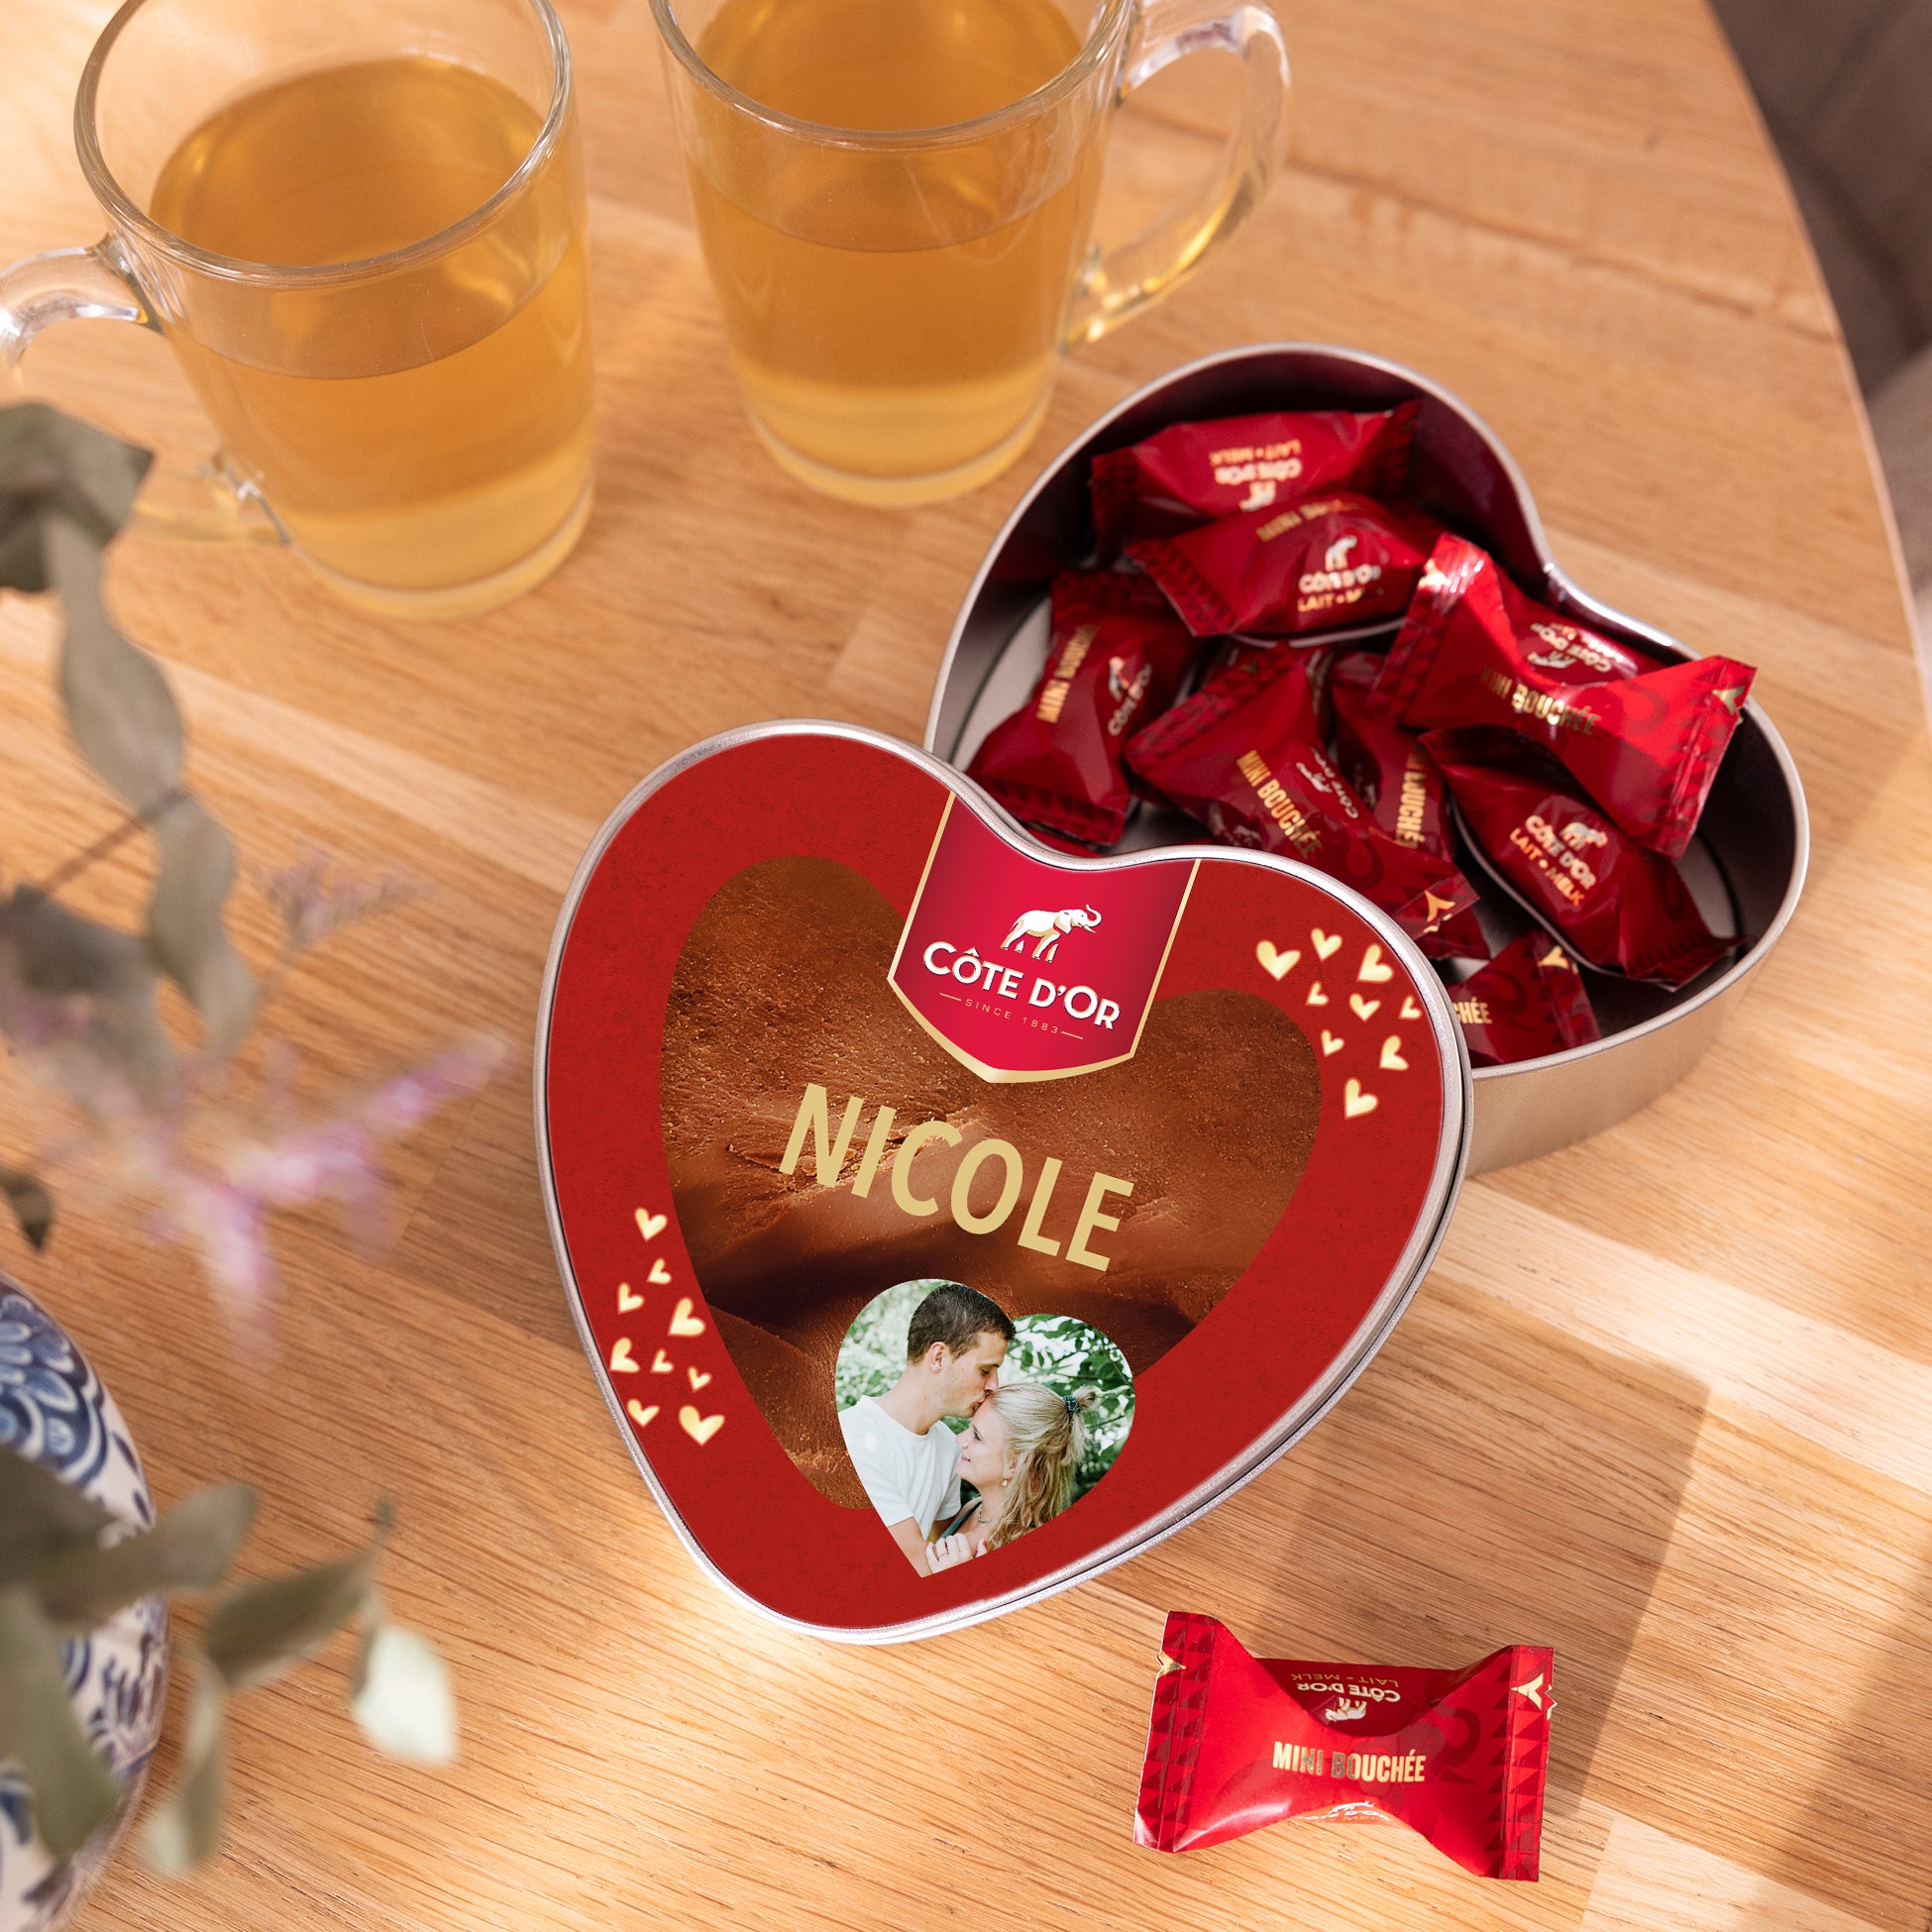 Personalised gift tin - Heart - Cote d’Or Mini Bouchee Chocolate Box